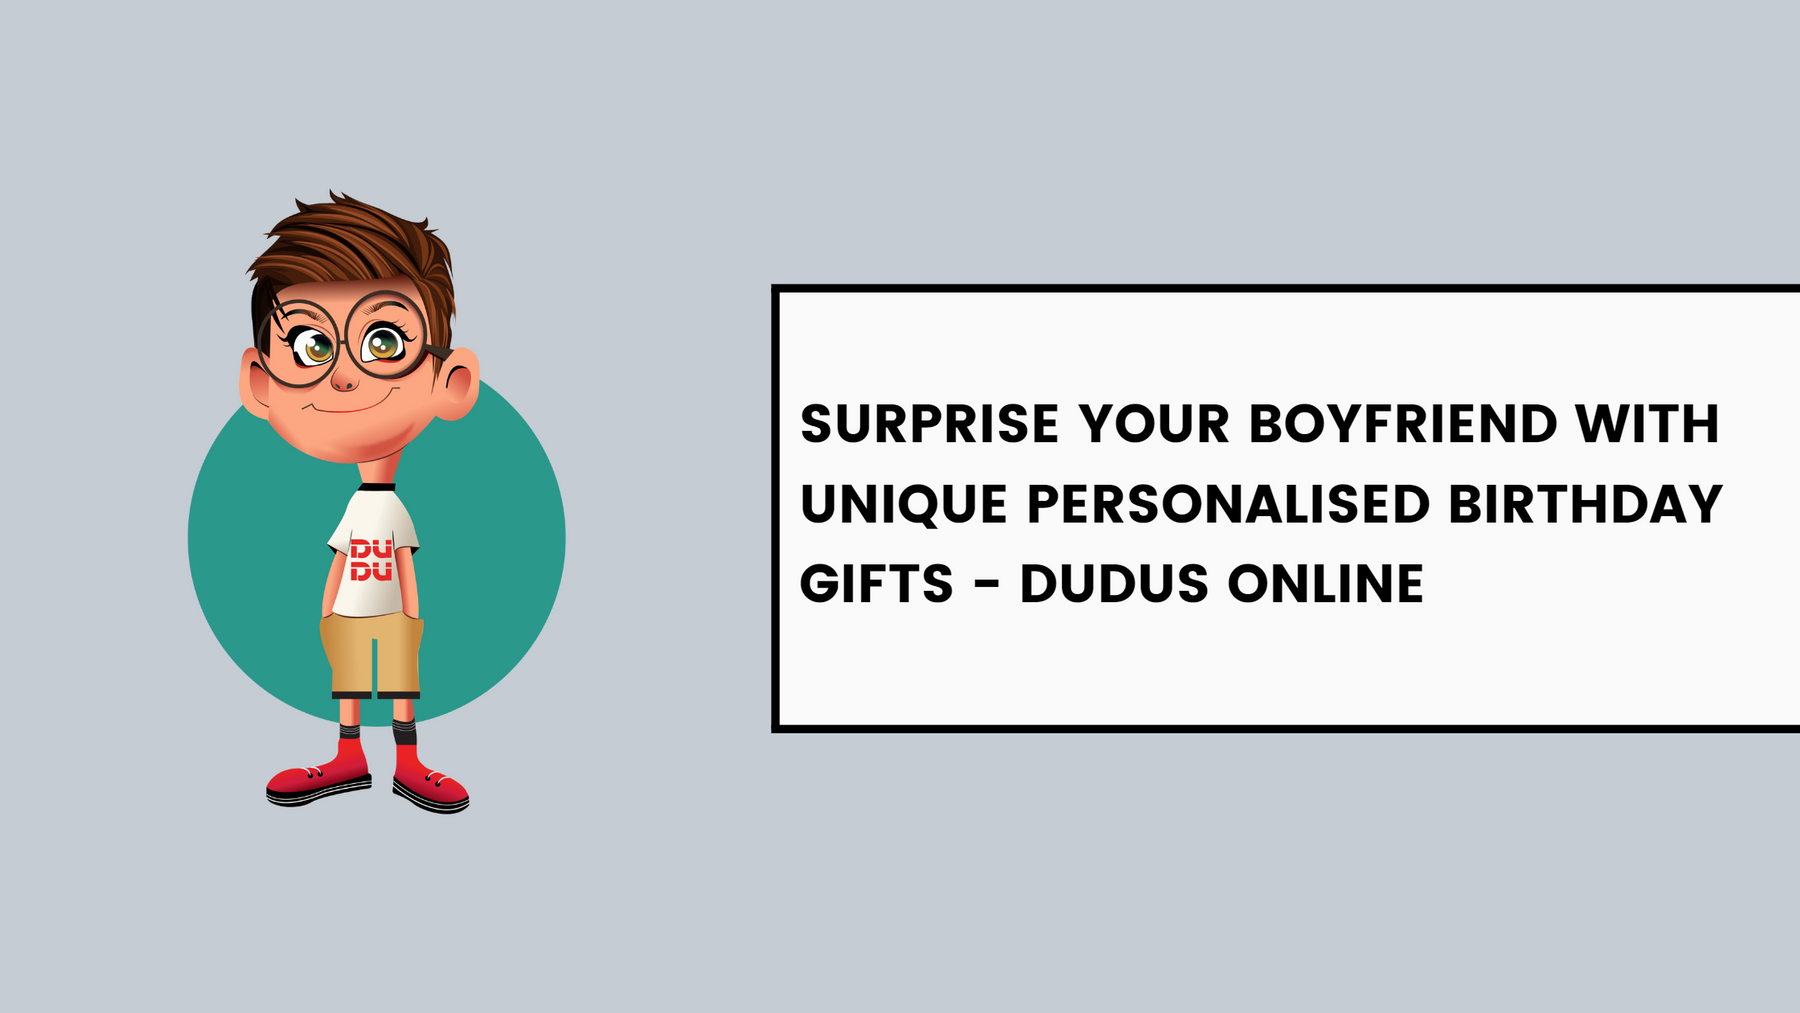 Surprise Your Boyfriend with Unique Personalised Birthday Gifts - Dudus Online